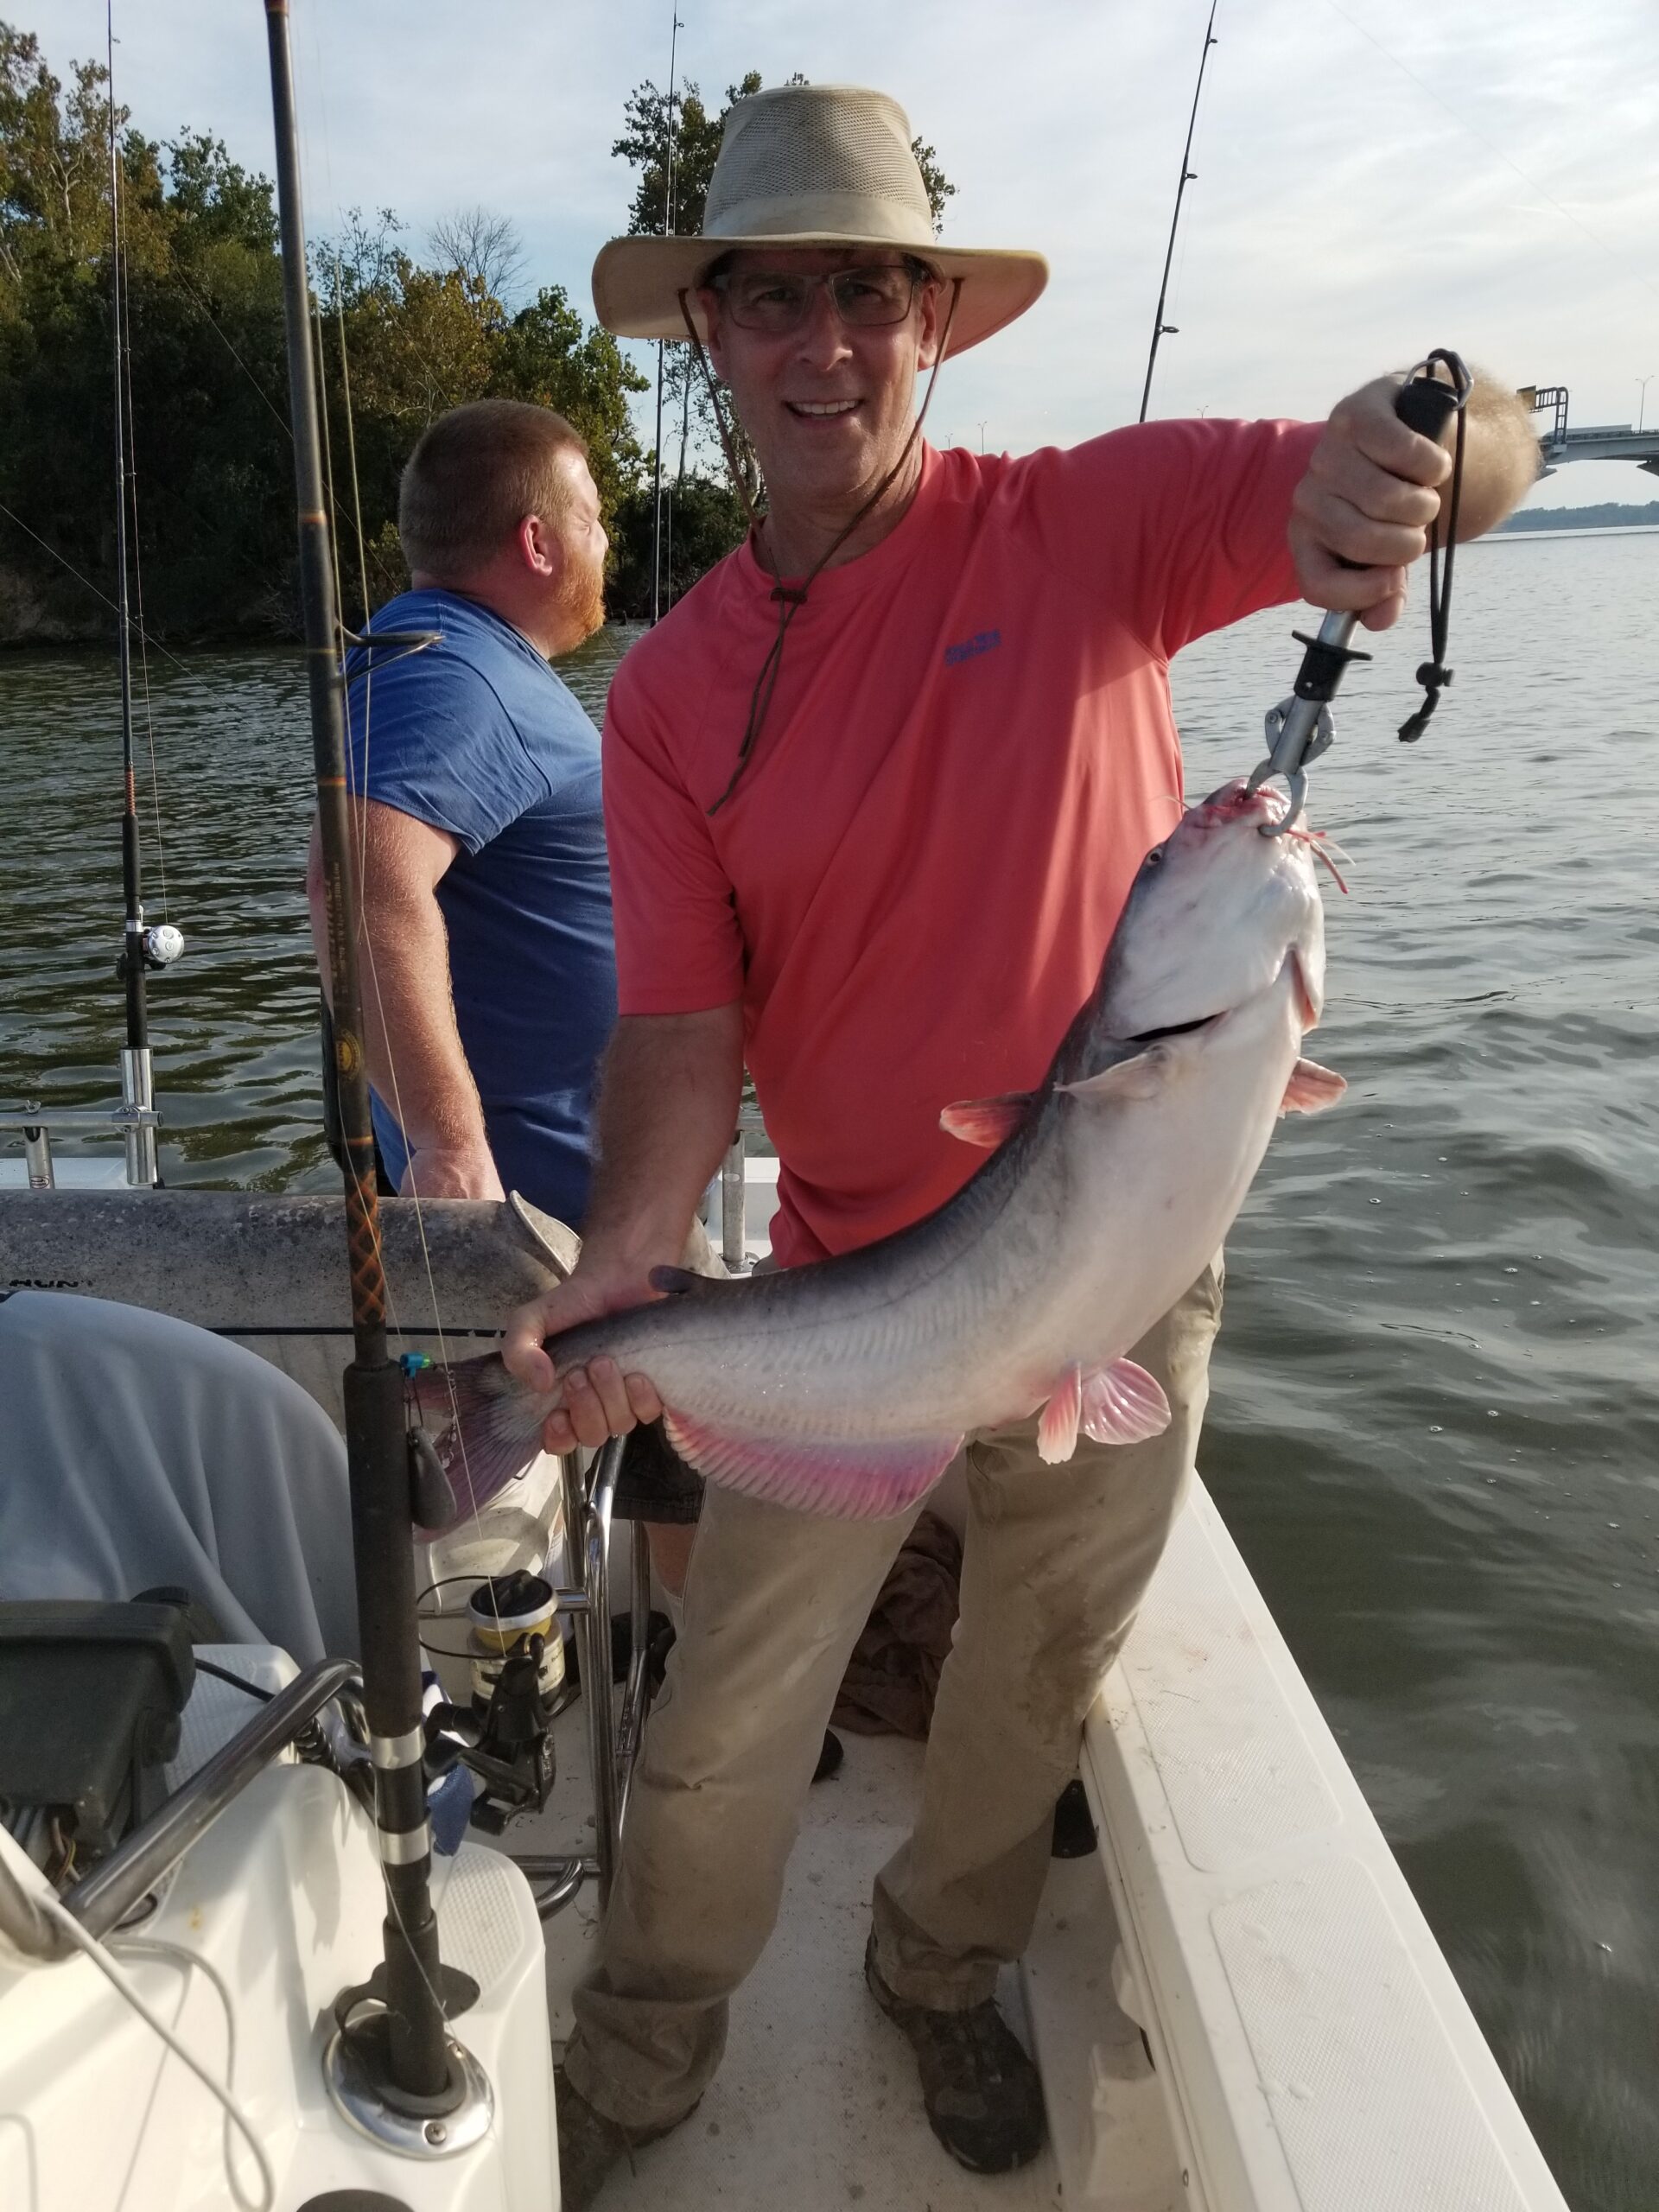 https://indianheadcharters.com/wp-content/uploads/2021/11/10-14-21-2-scaled.jpg